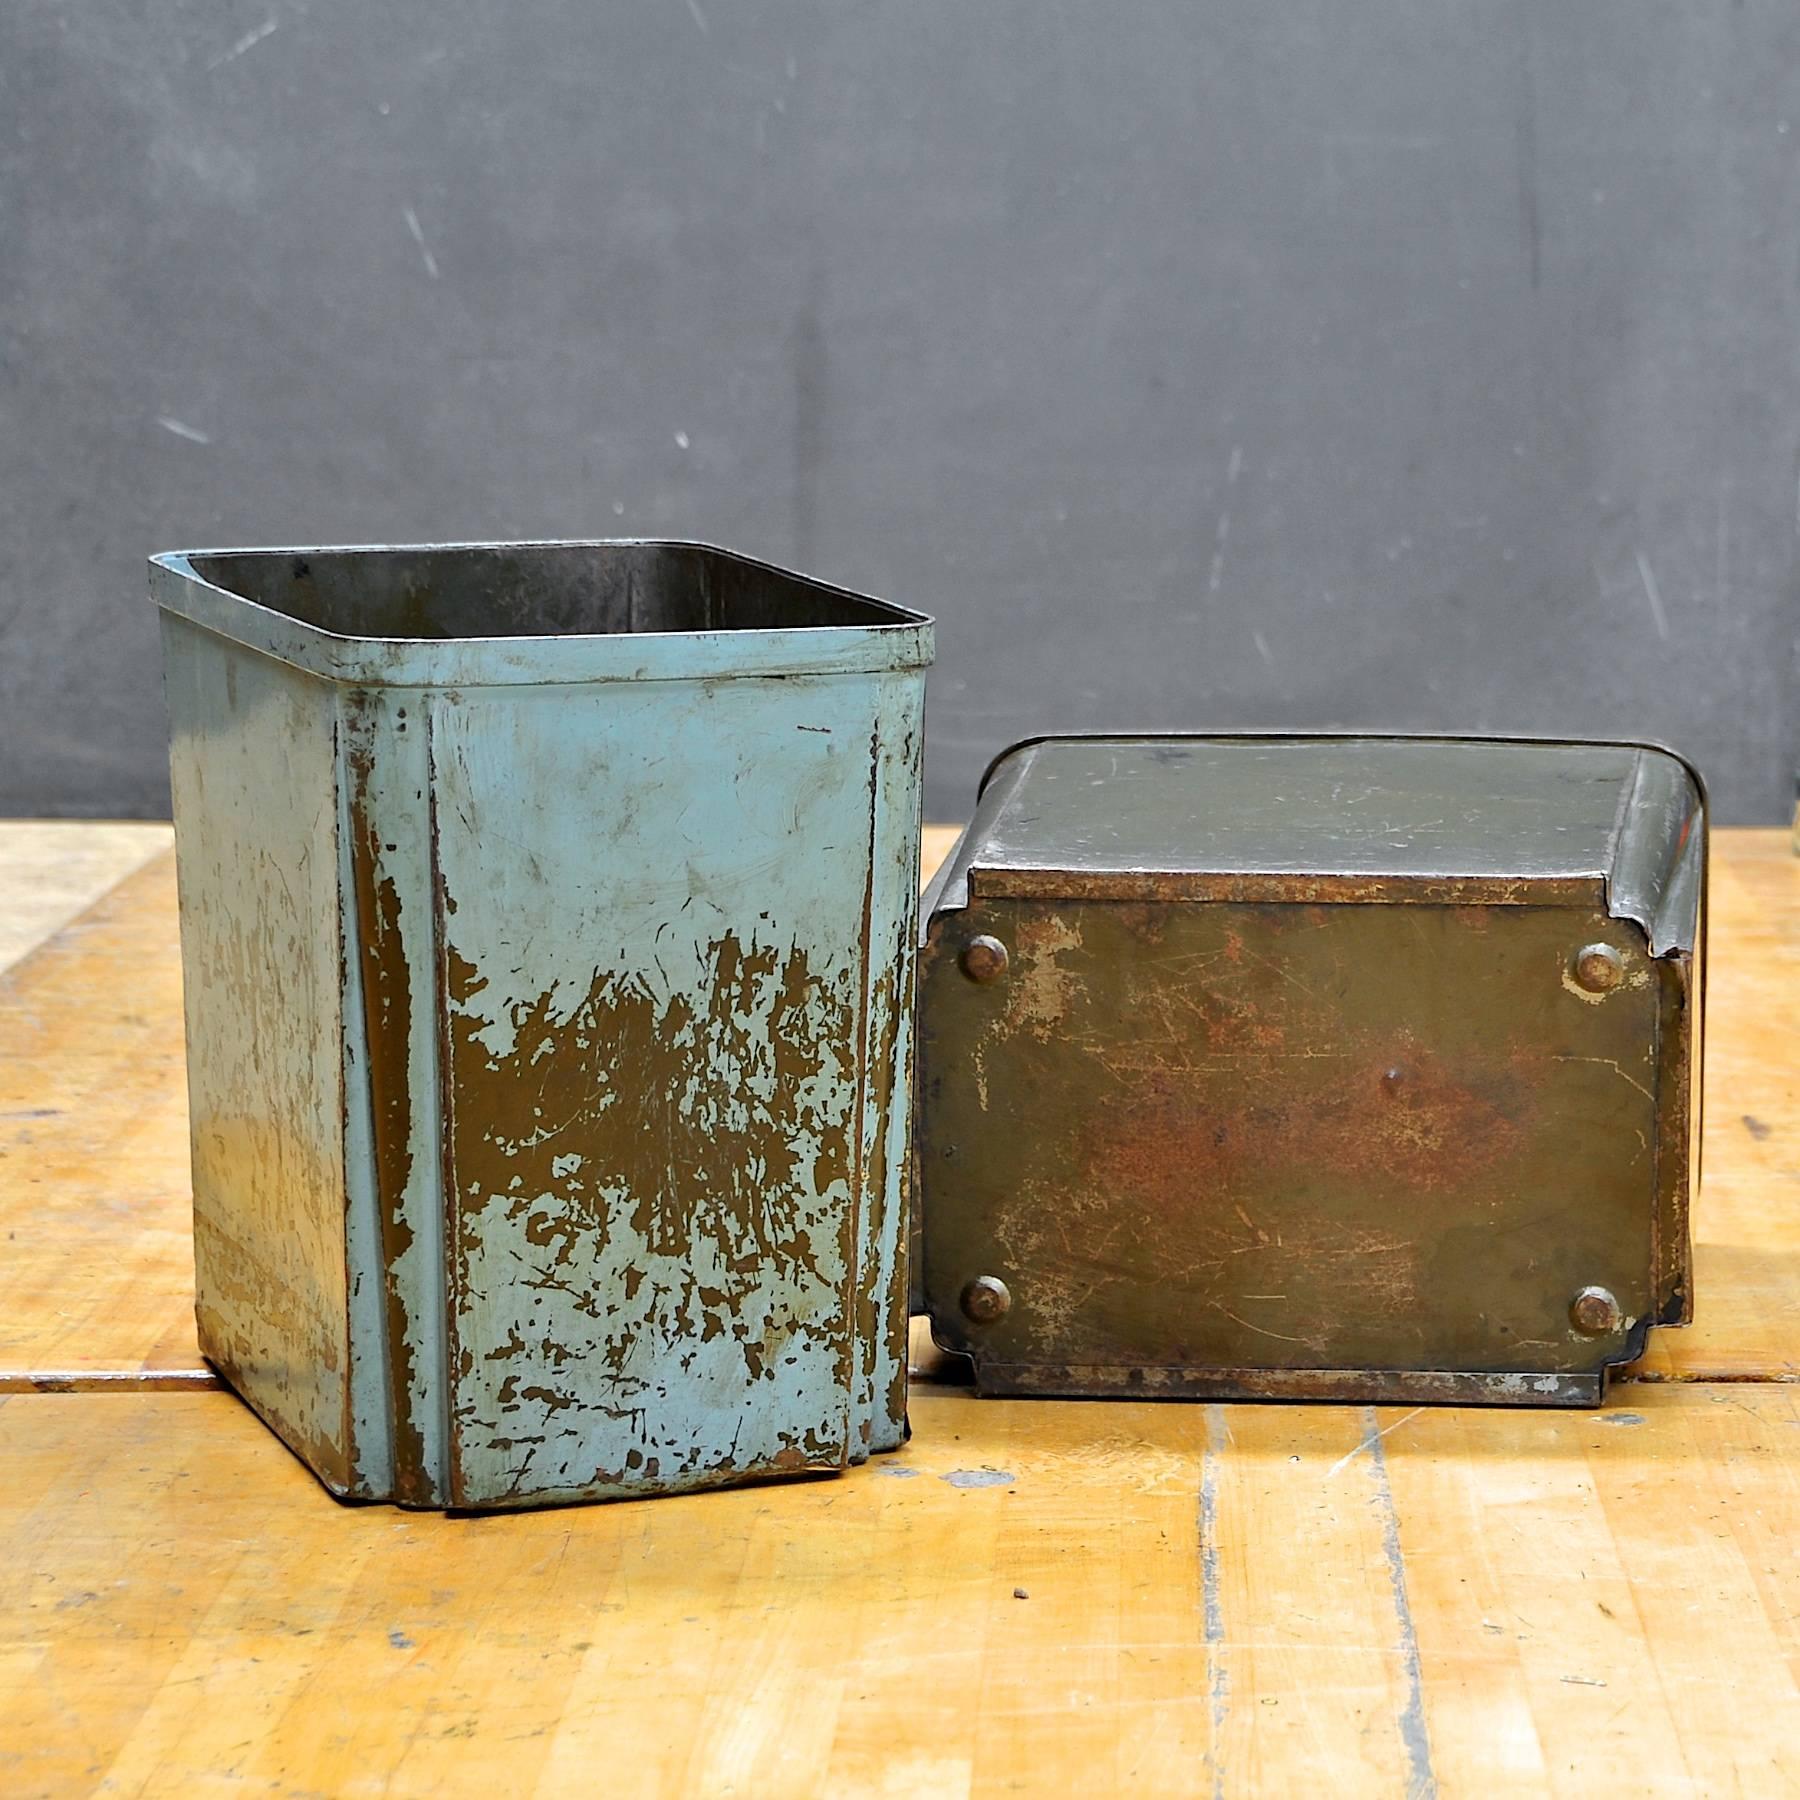 Art Deco Industrial Age Machine Pressed Factory Office Wastebaskets Steel Trash Cans